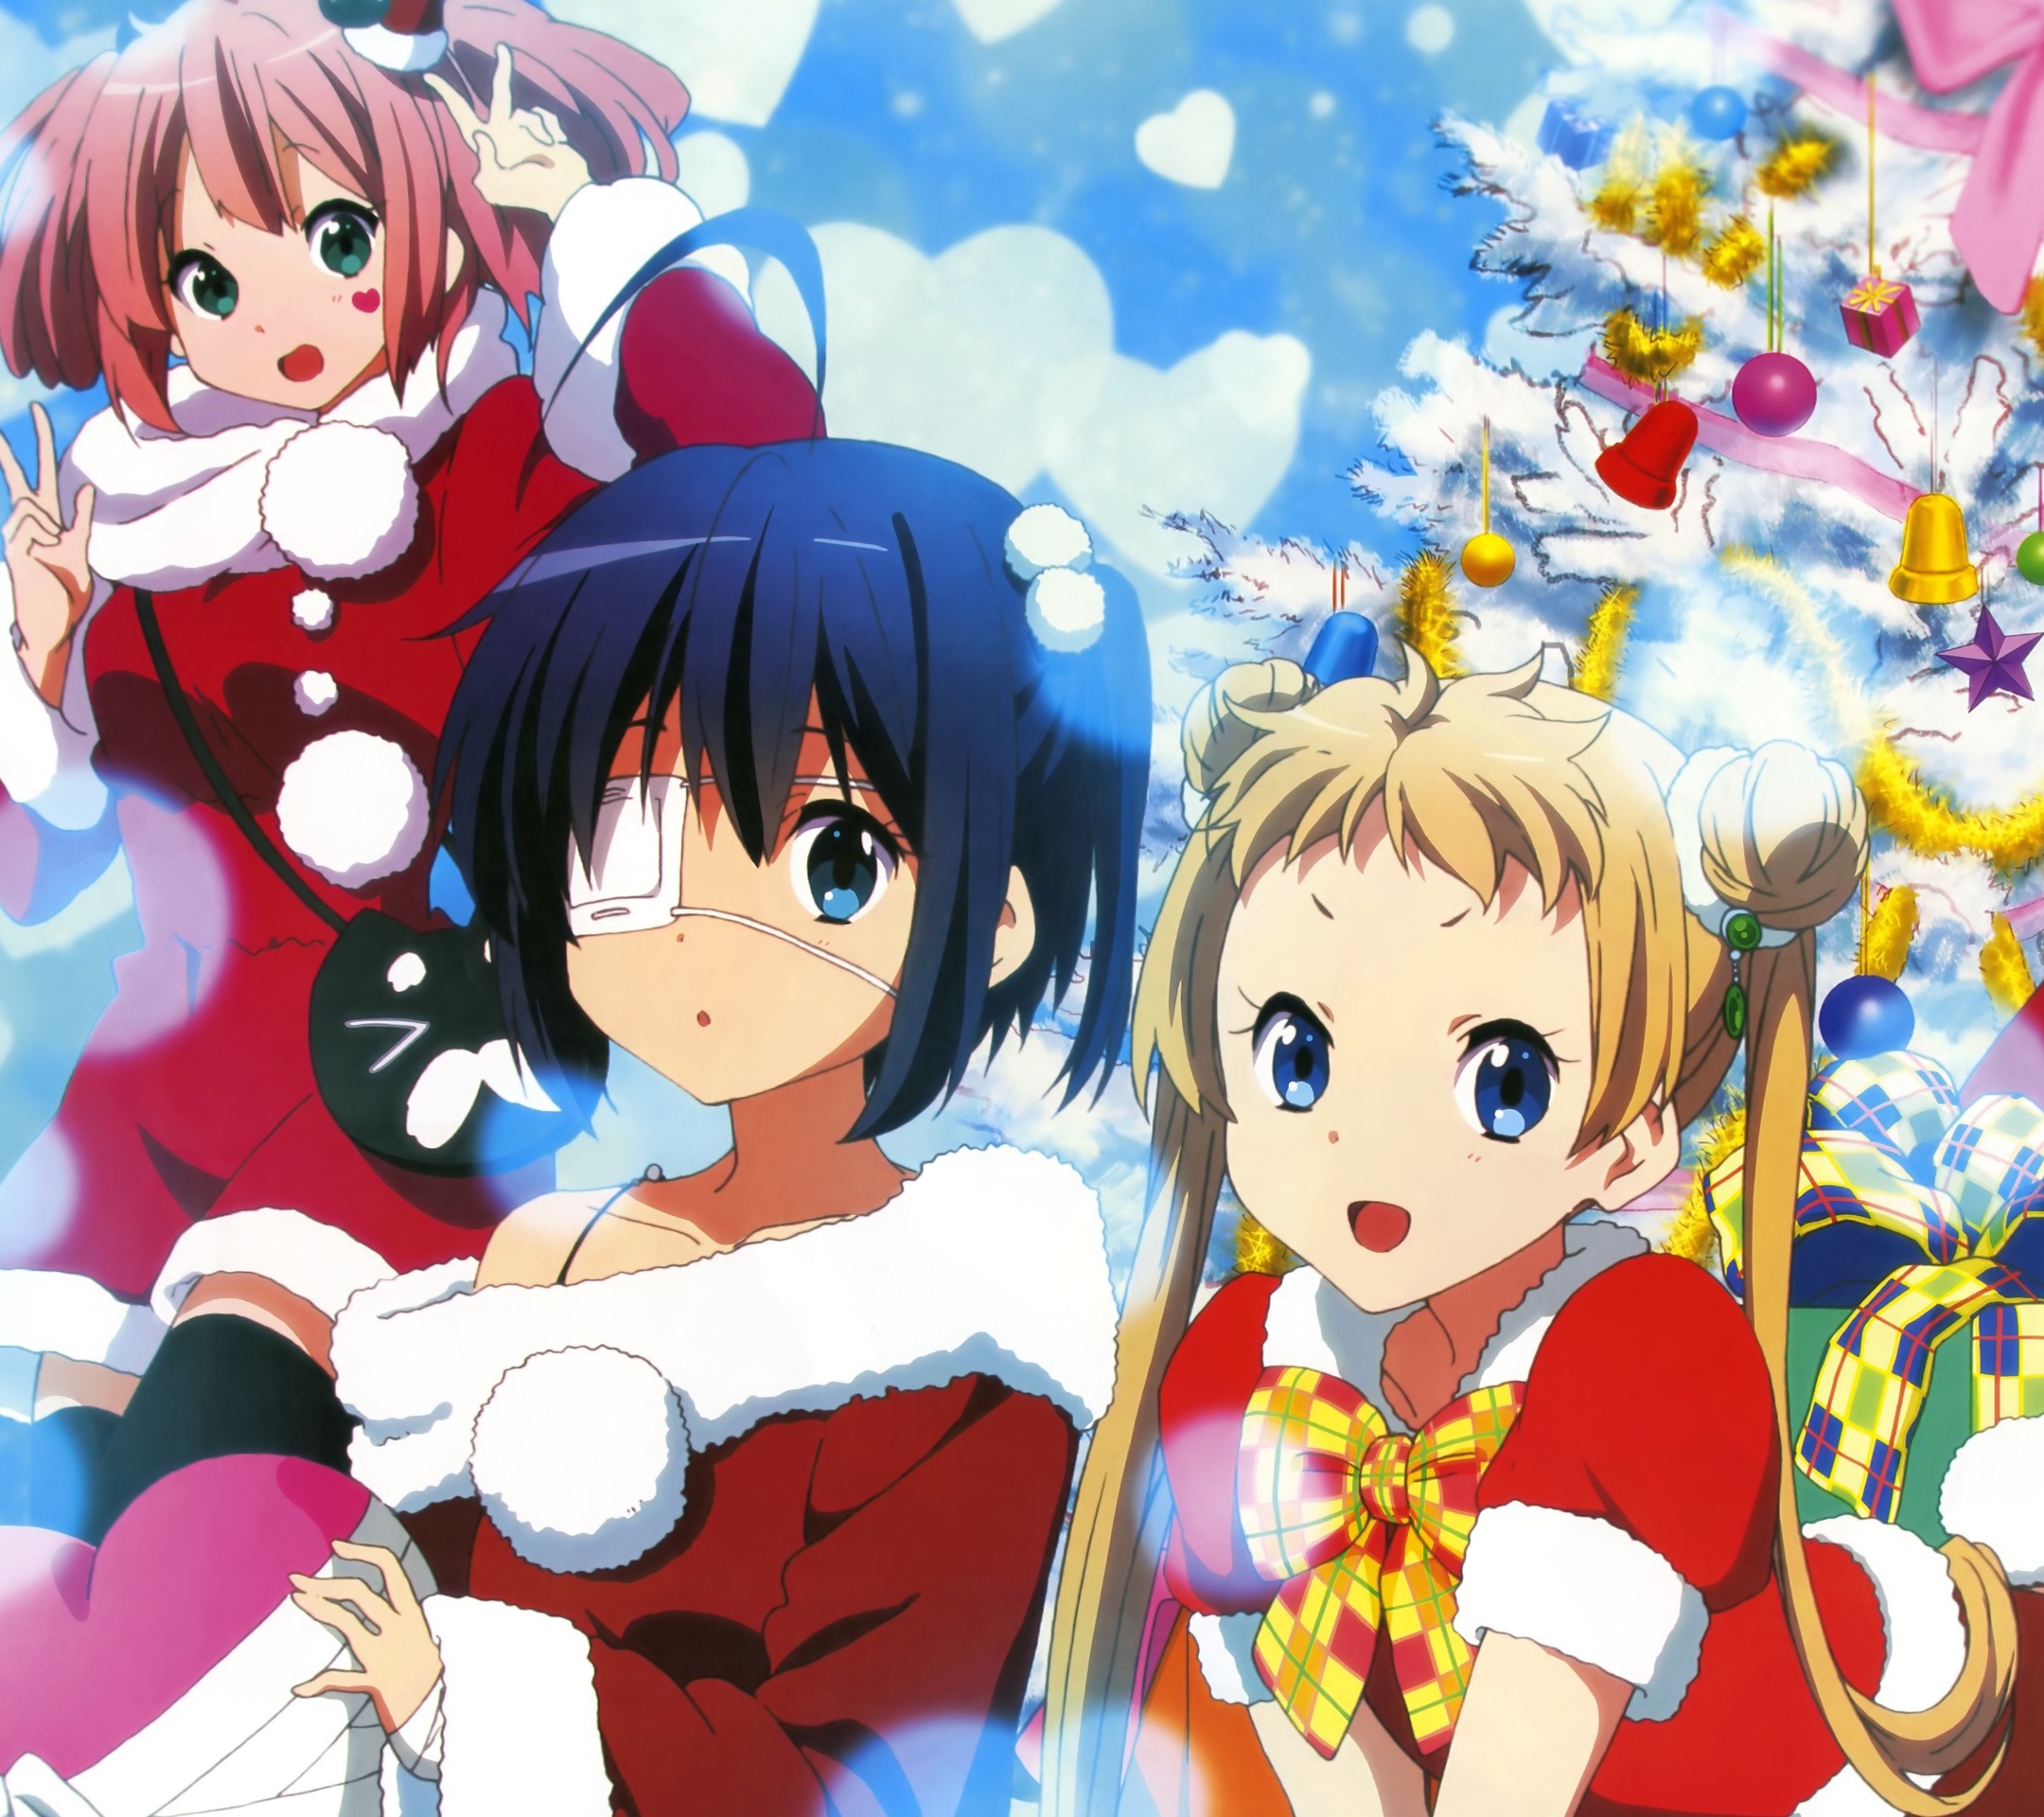 60 Anime Christmas HD Wallpapers and Backgrounds